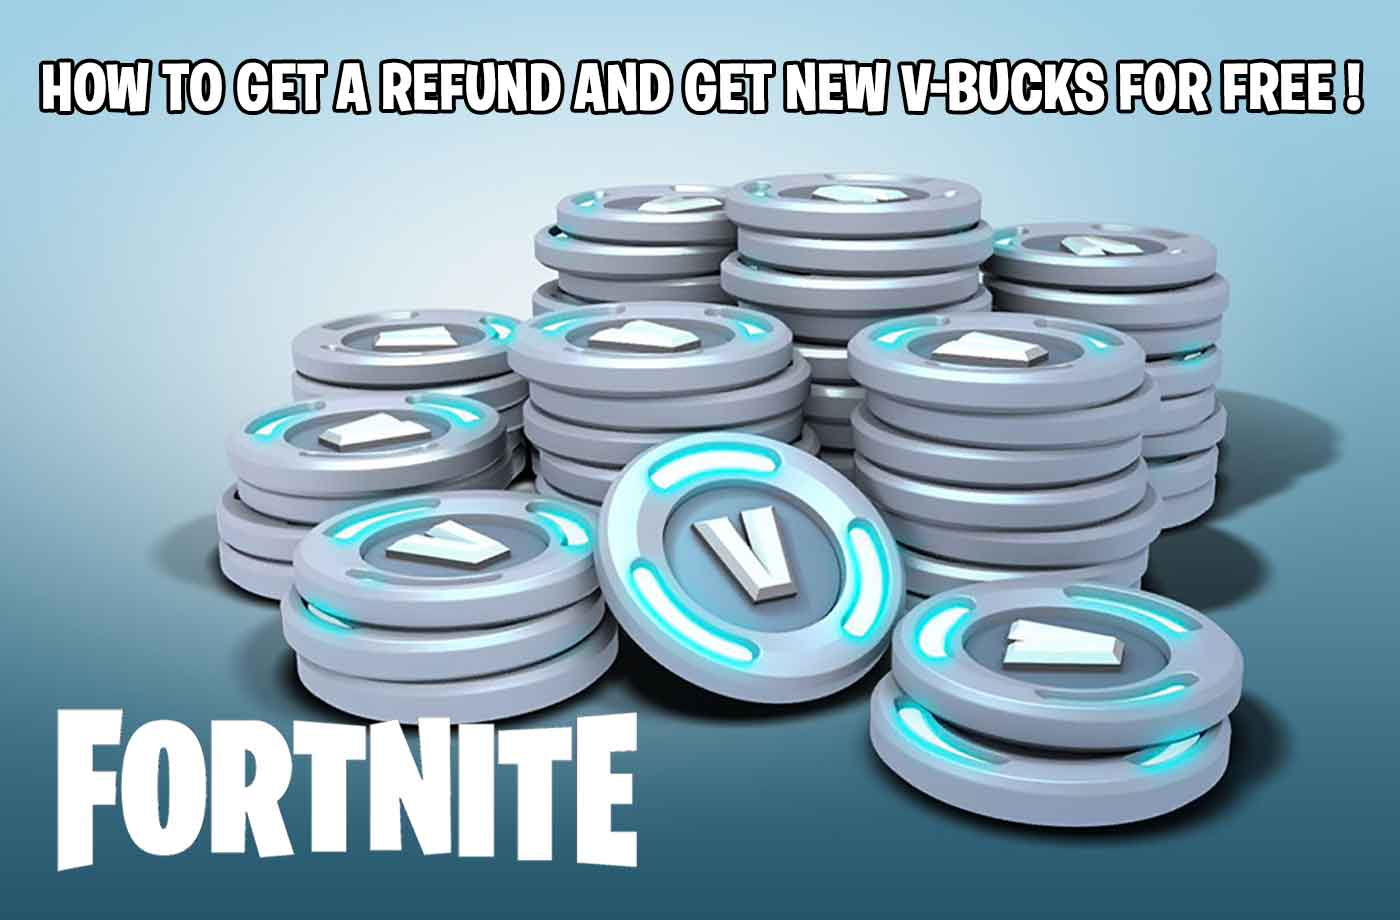 how refund fortnite | kill-the-game.com best guides and ... - 1400 x 920 jpeg 68kB